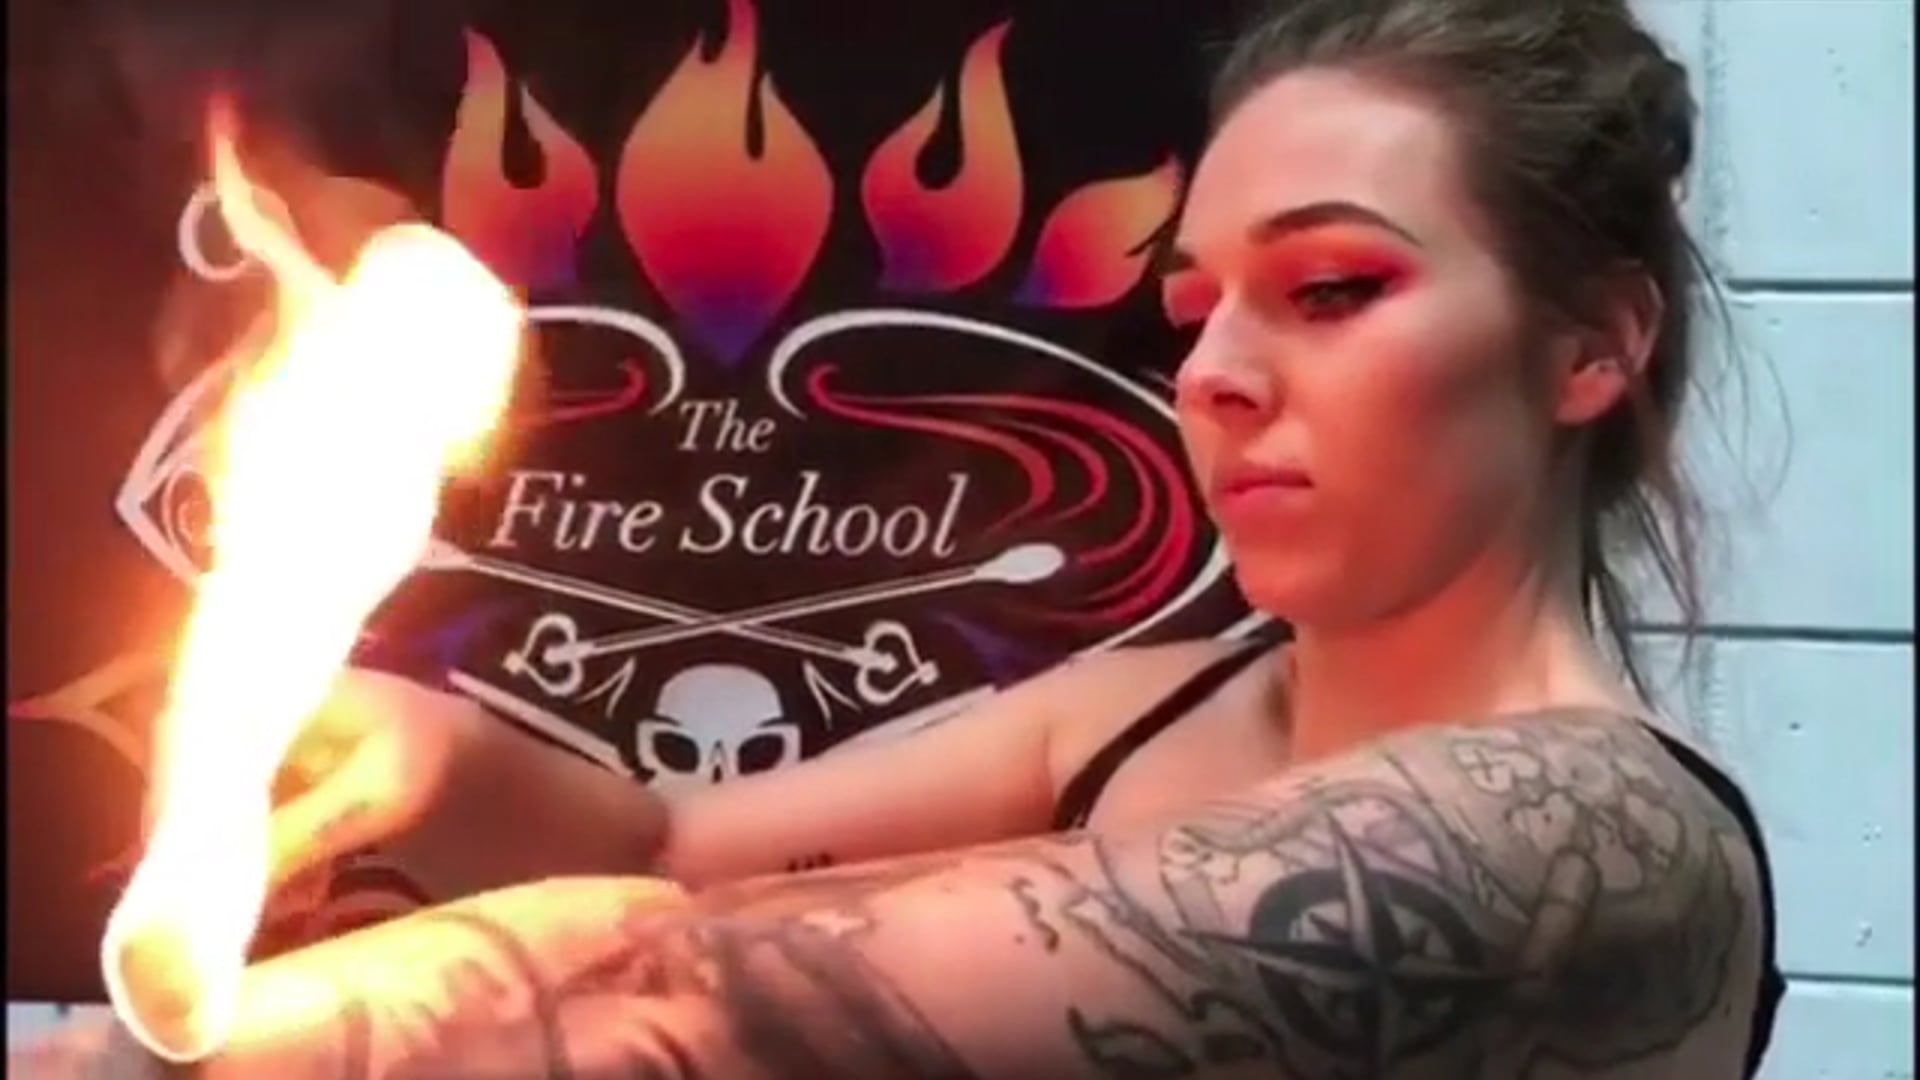 Marcia - beginners private body burning and fire eating class